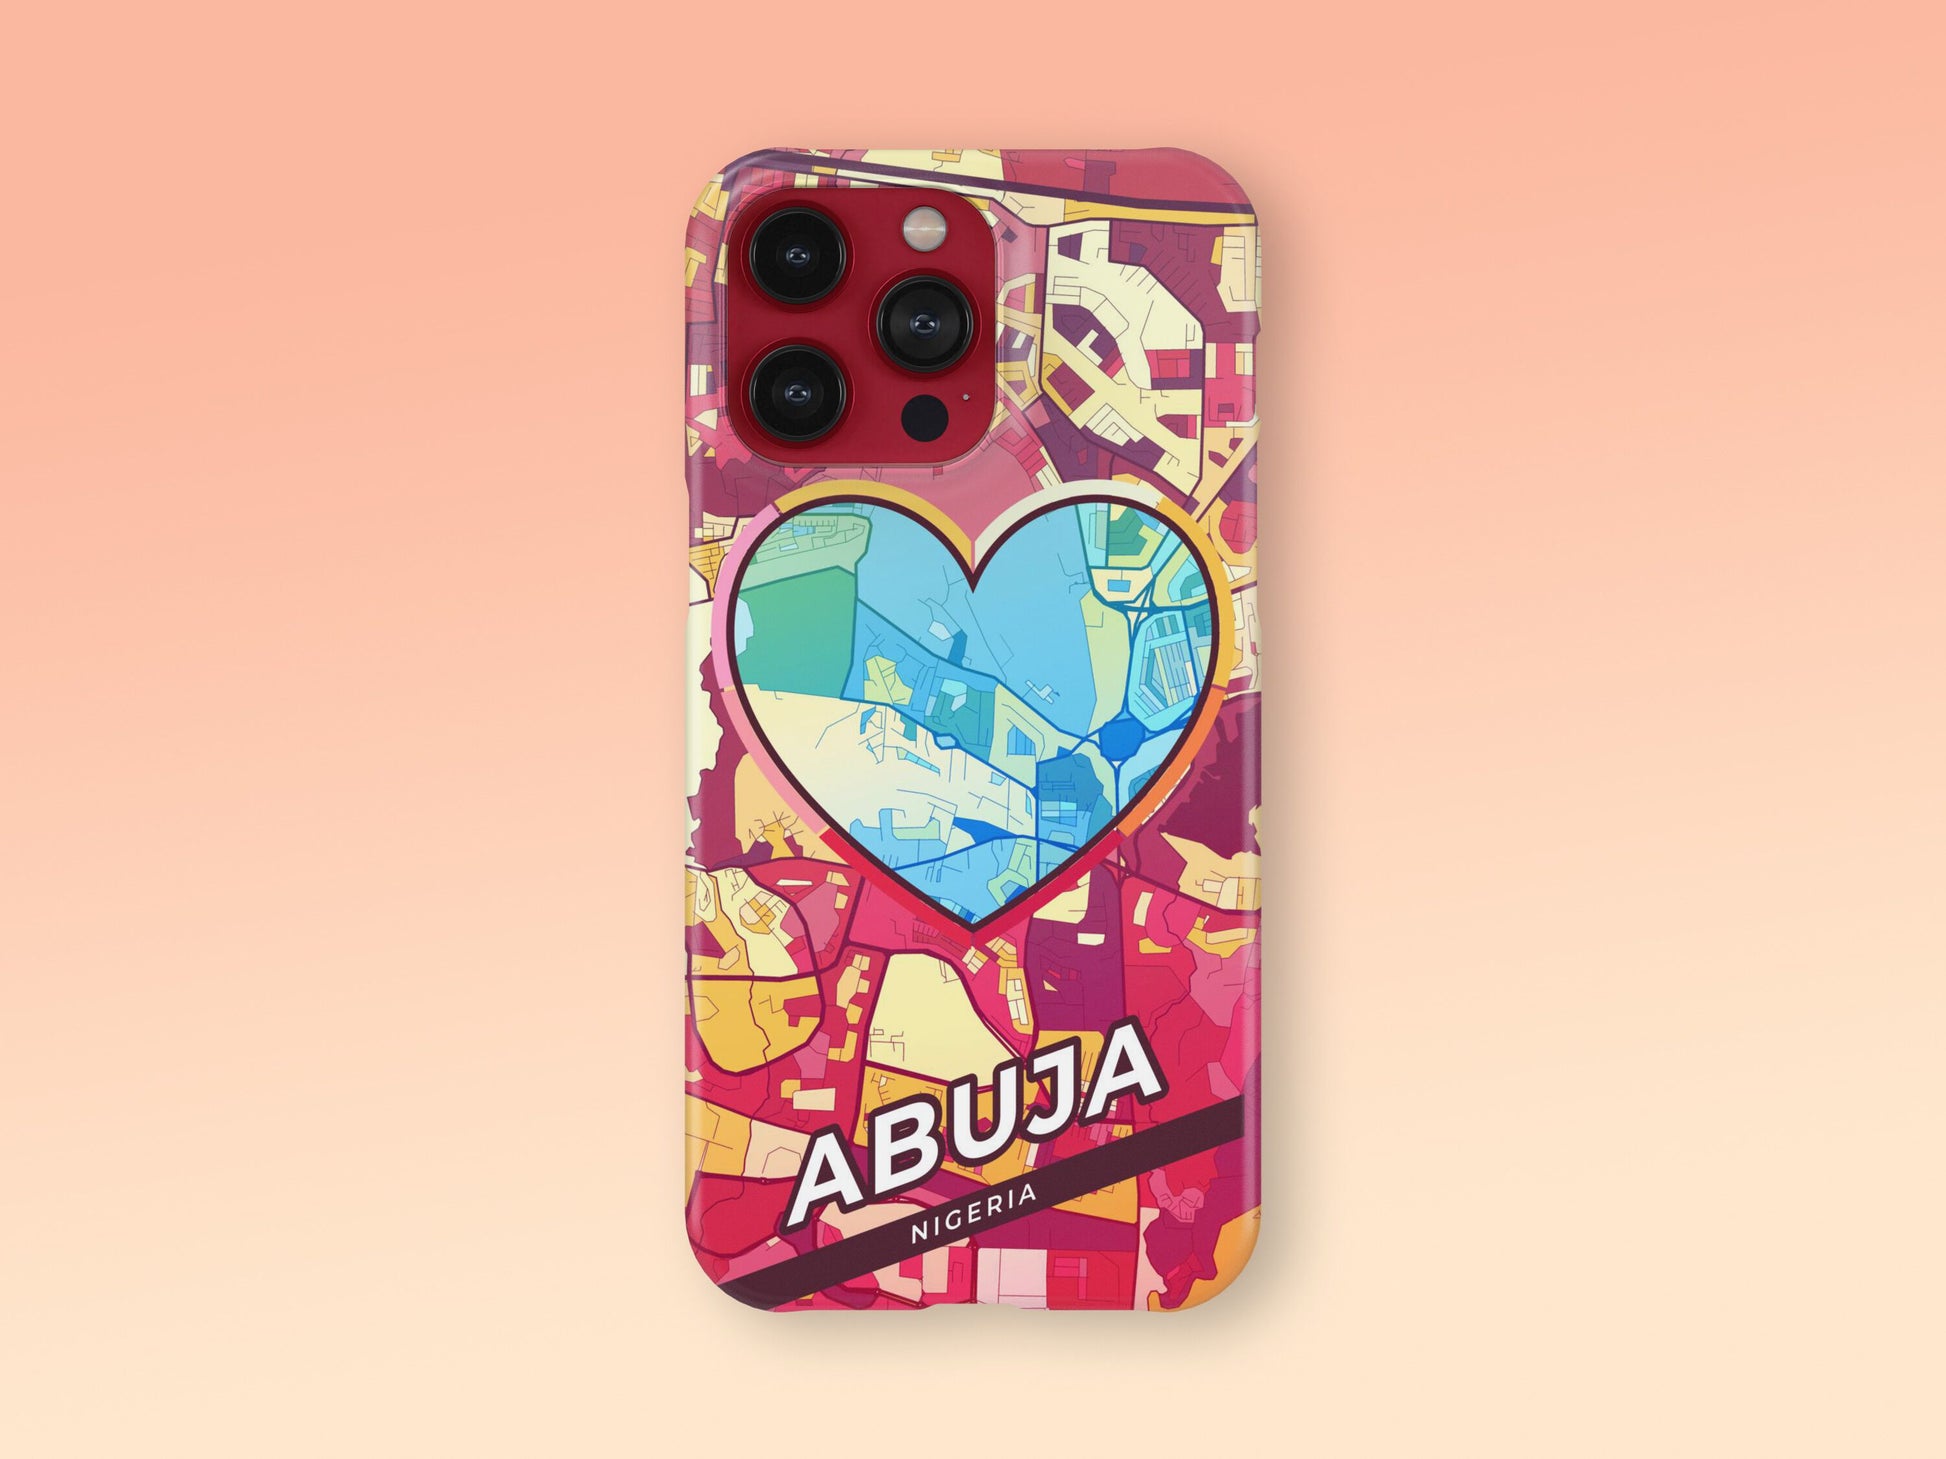 Abuja Nigeria slim phone case with colorful icon. Birthday, wedding or housewarming gift. Couple match cases. 2